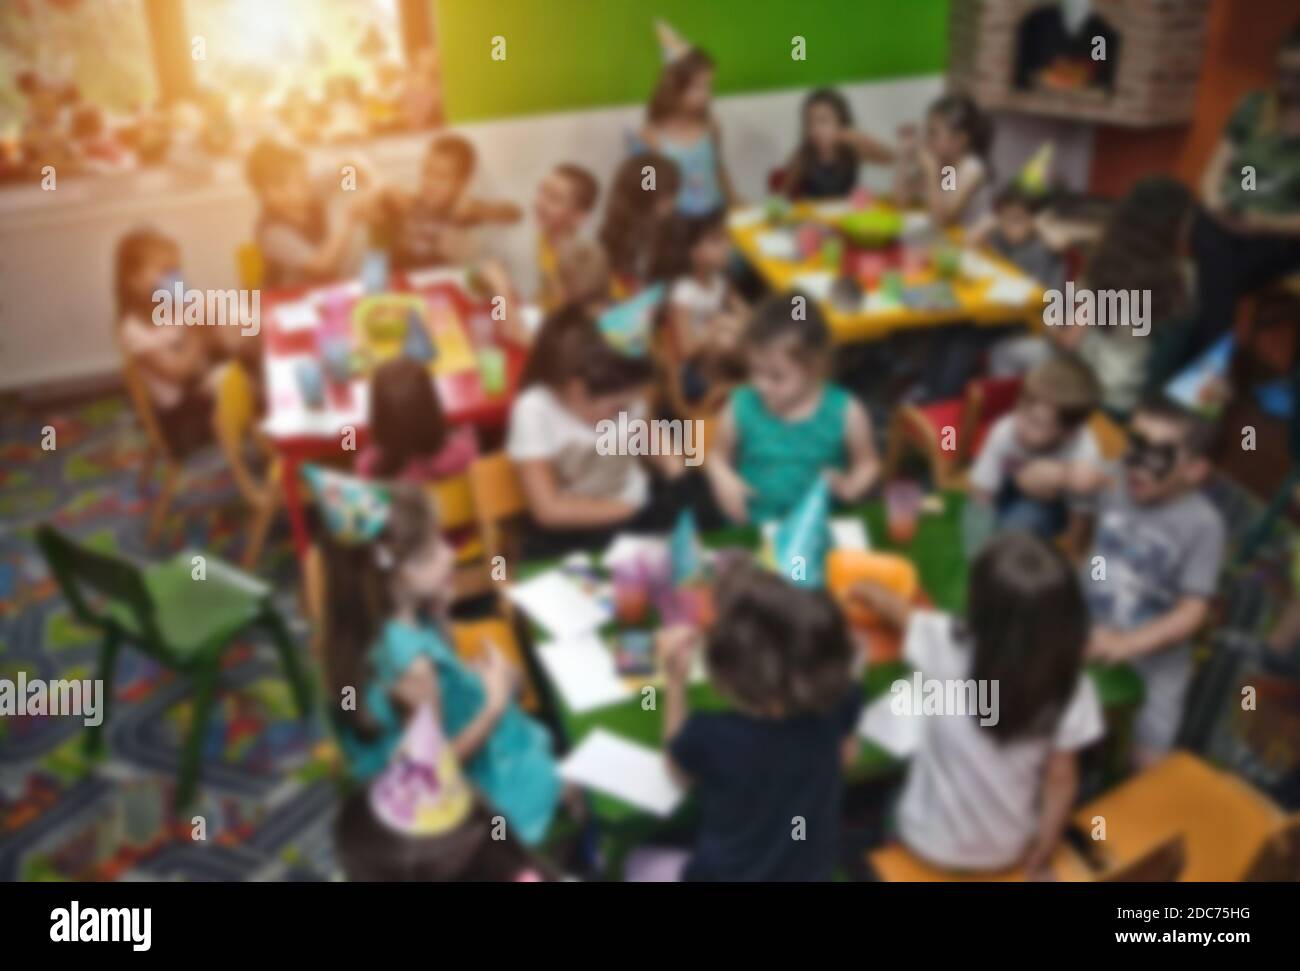 Blurred image for background usage. Kids at birthday party in a play room, sitting on little chairs. Stock Photo